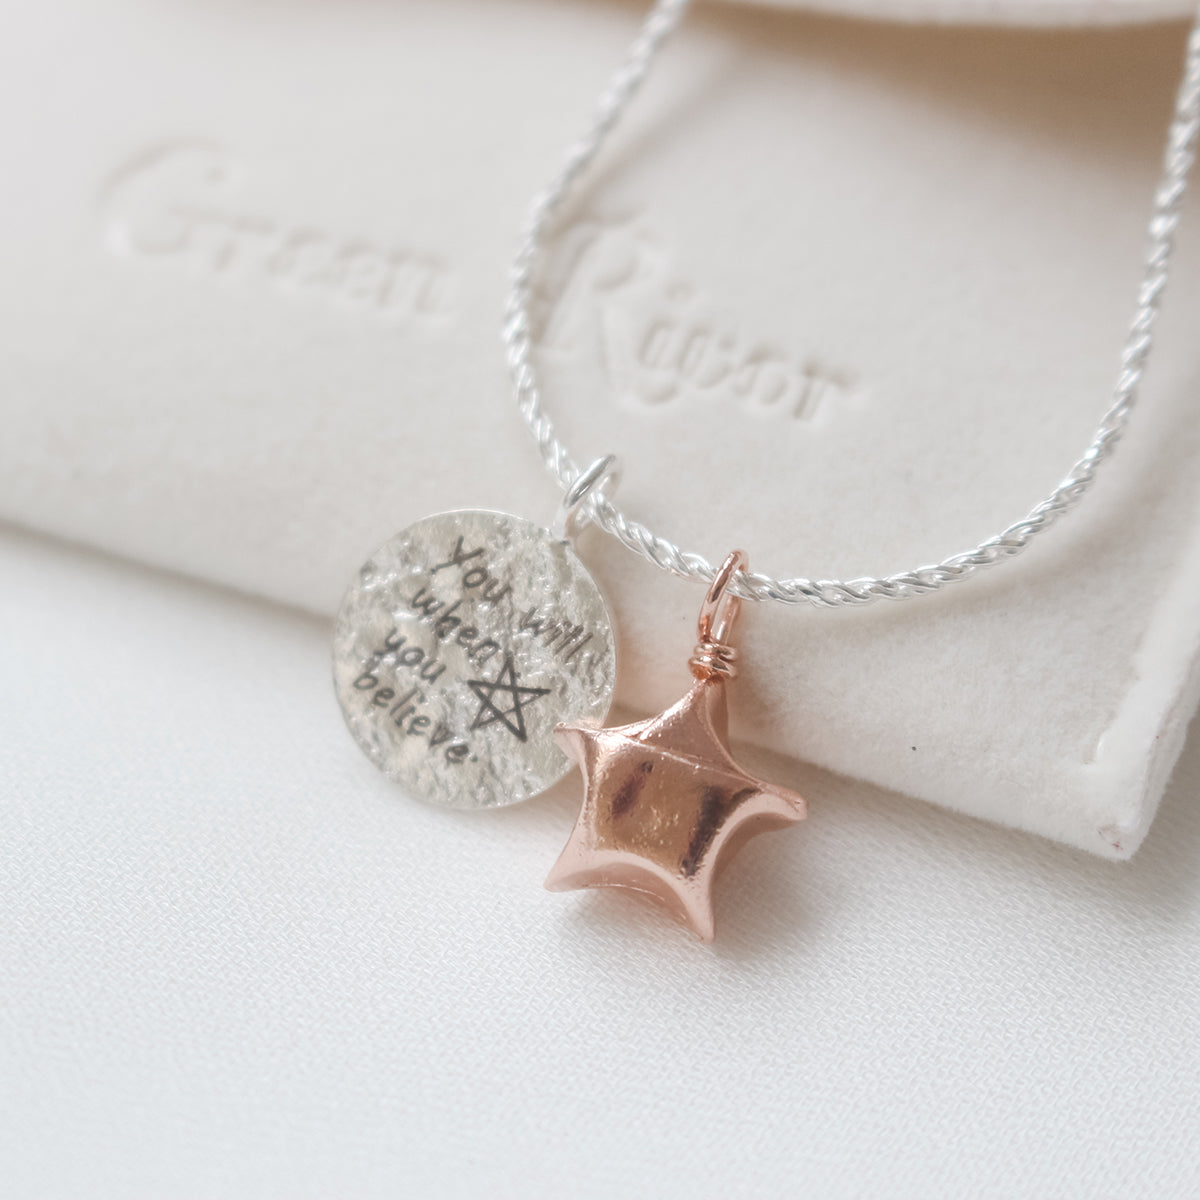 Inspirational Lucky Star Necklace - You Will When You Believe